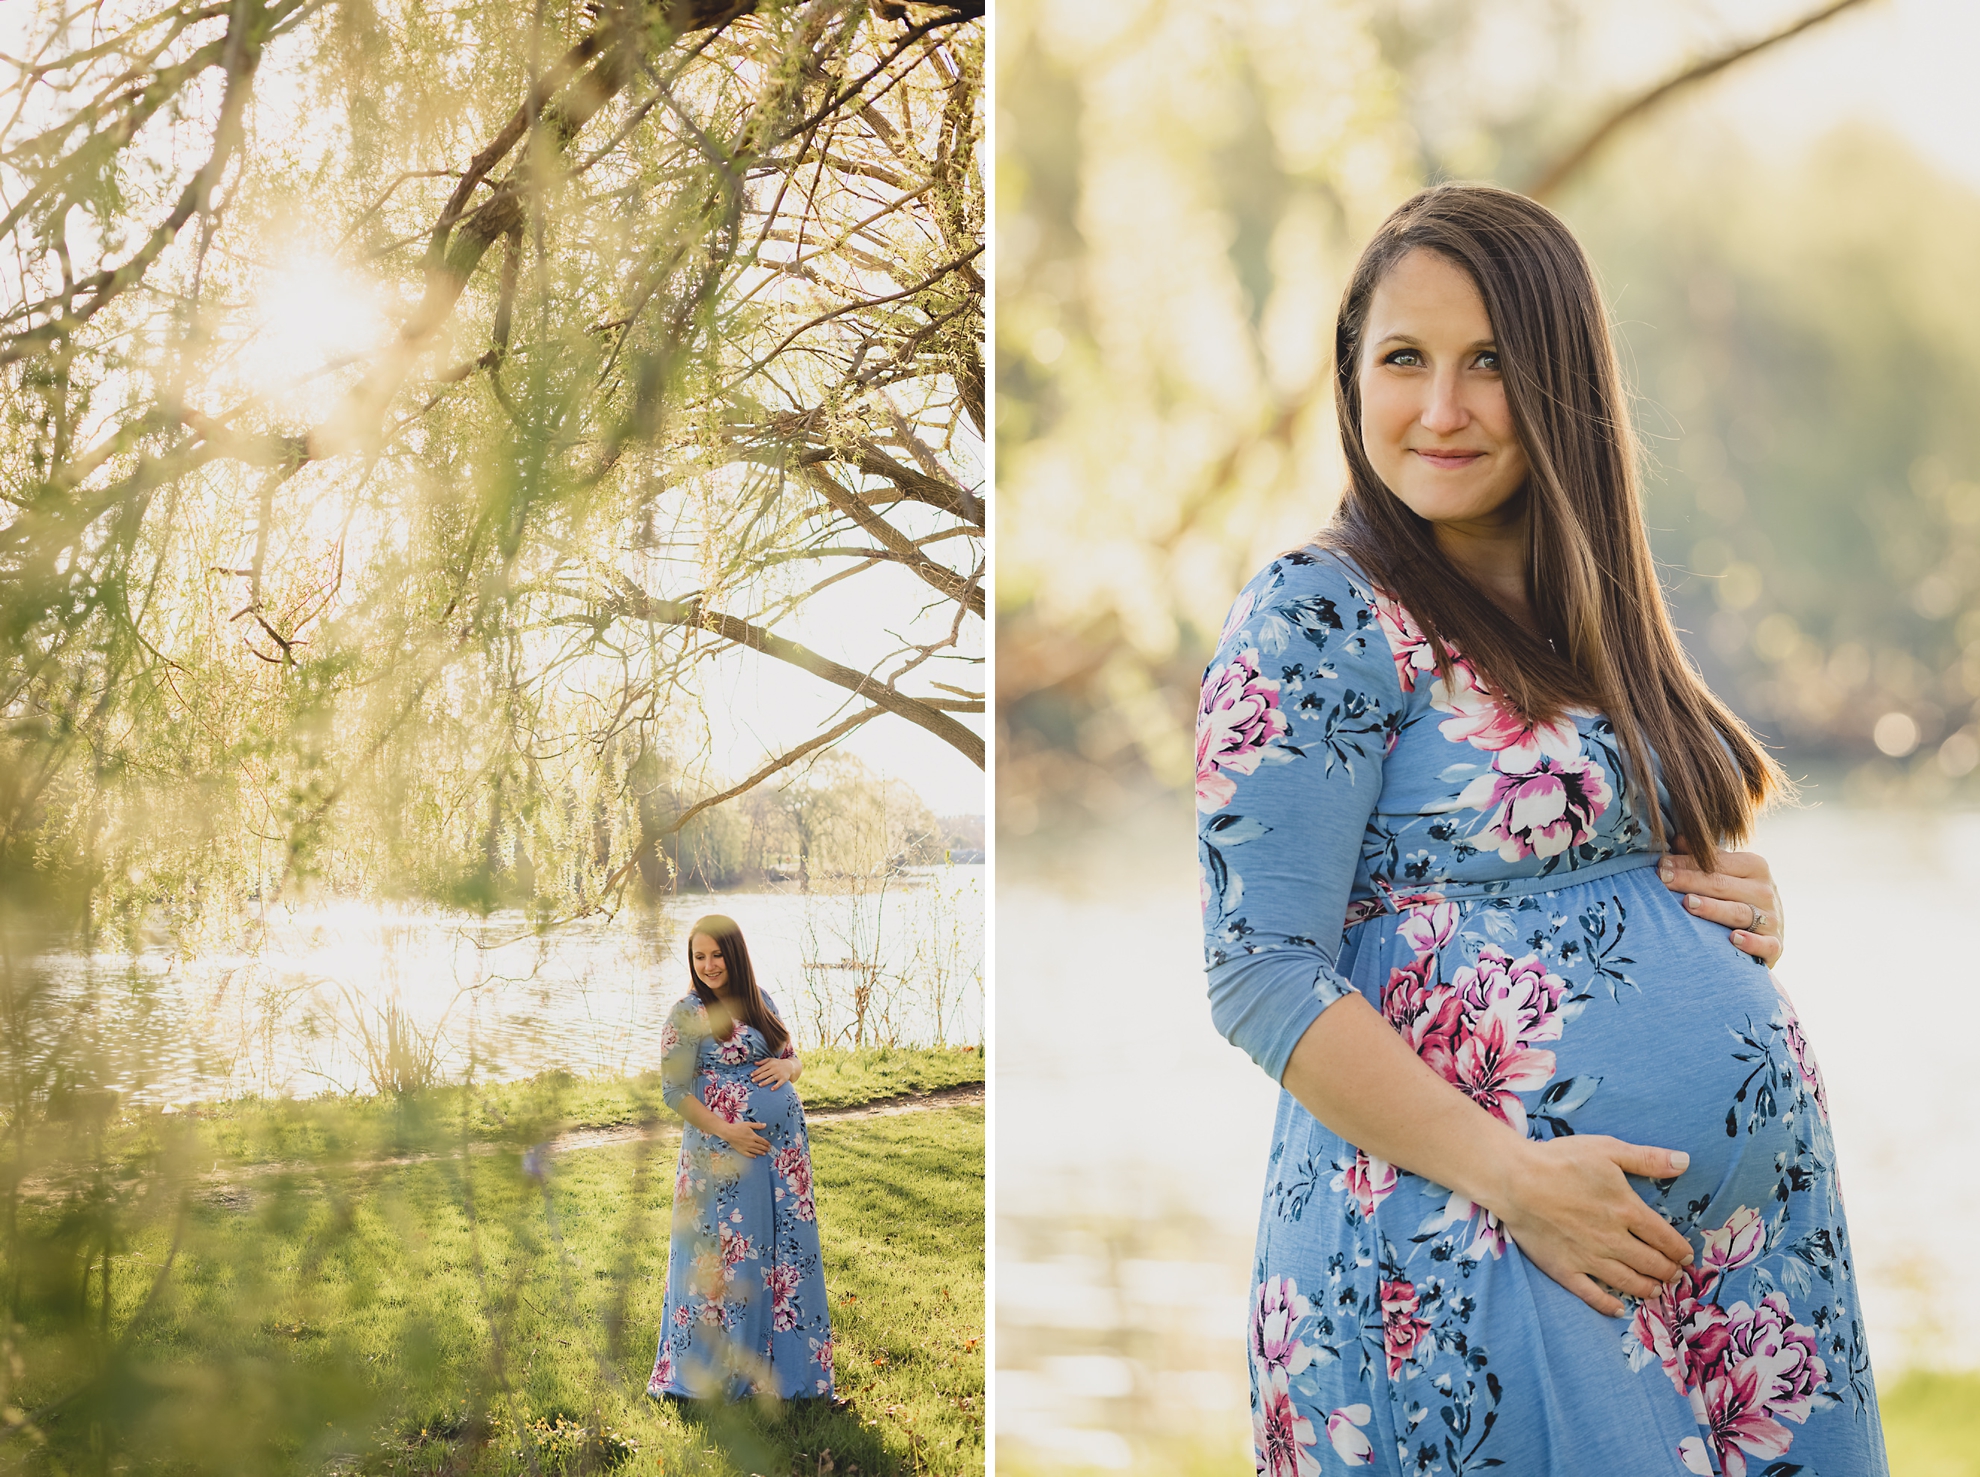 pregnant woman poses for photographer during maternity portrait photography session with cherry blossoms in Delaware Park in Buffalo, NY